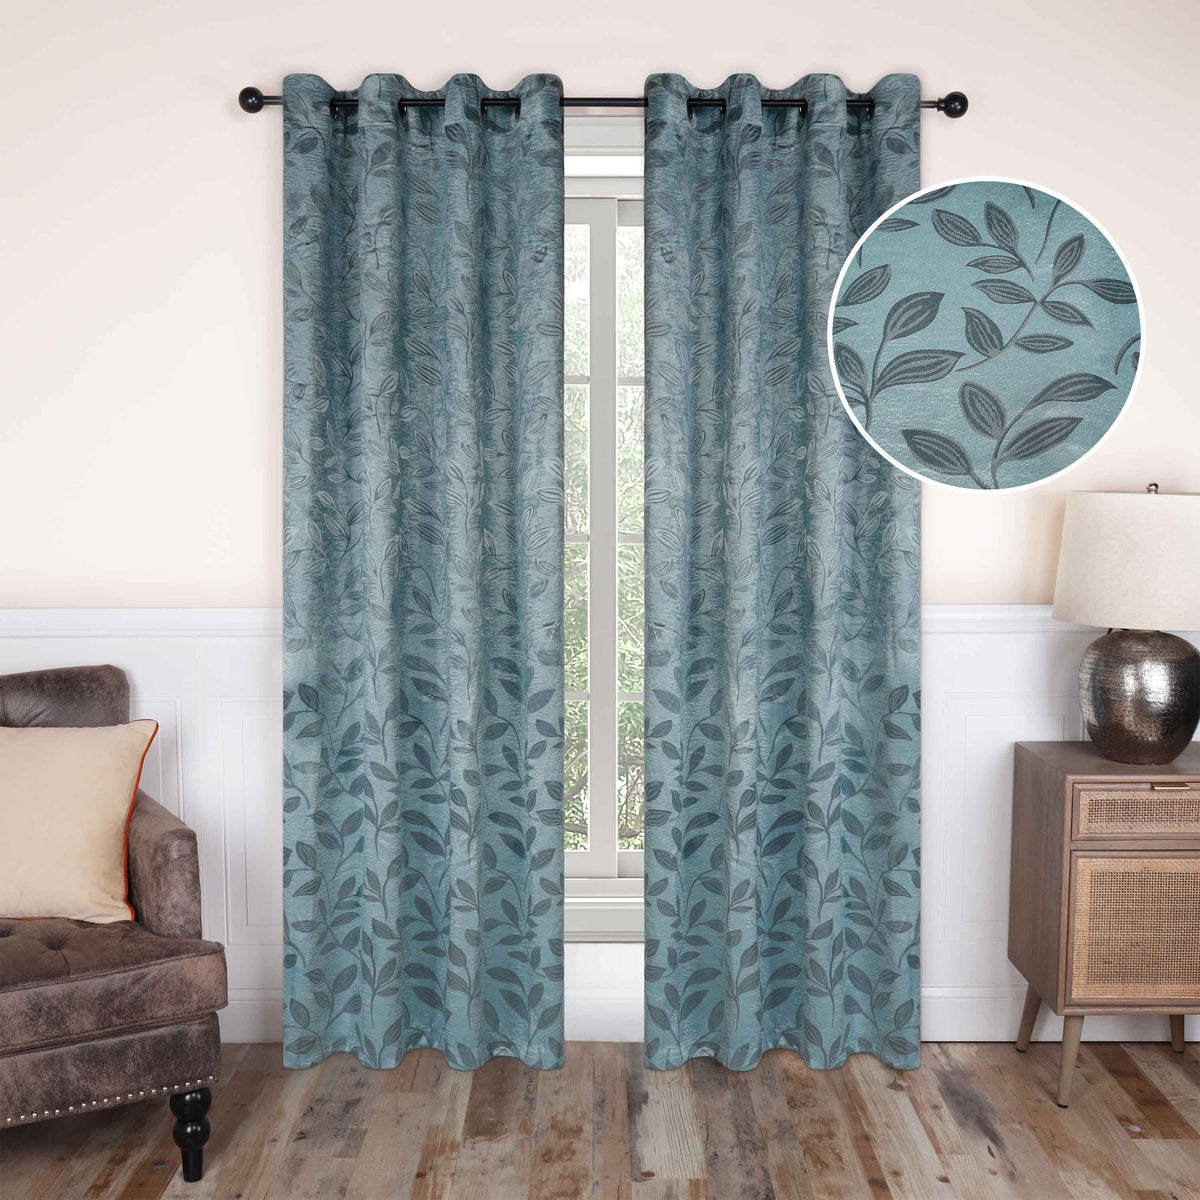 Leaves Machine Washable Room Darkening Blackout Curtains, Set of 2 - GreenLily